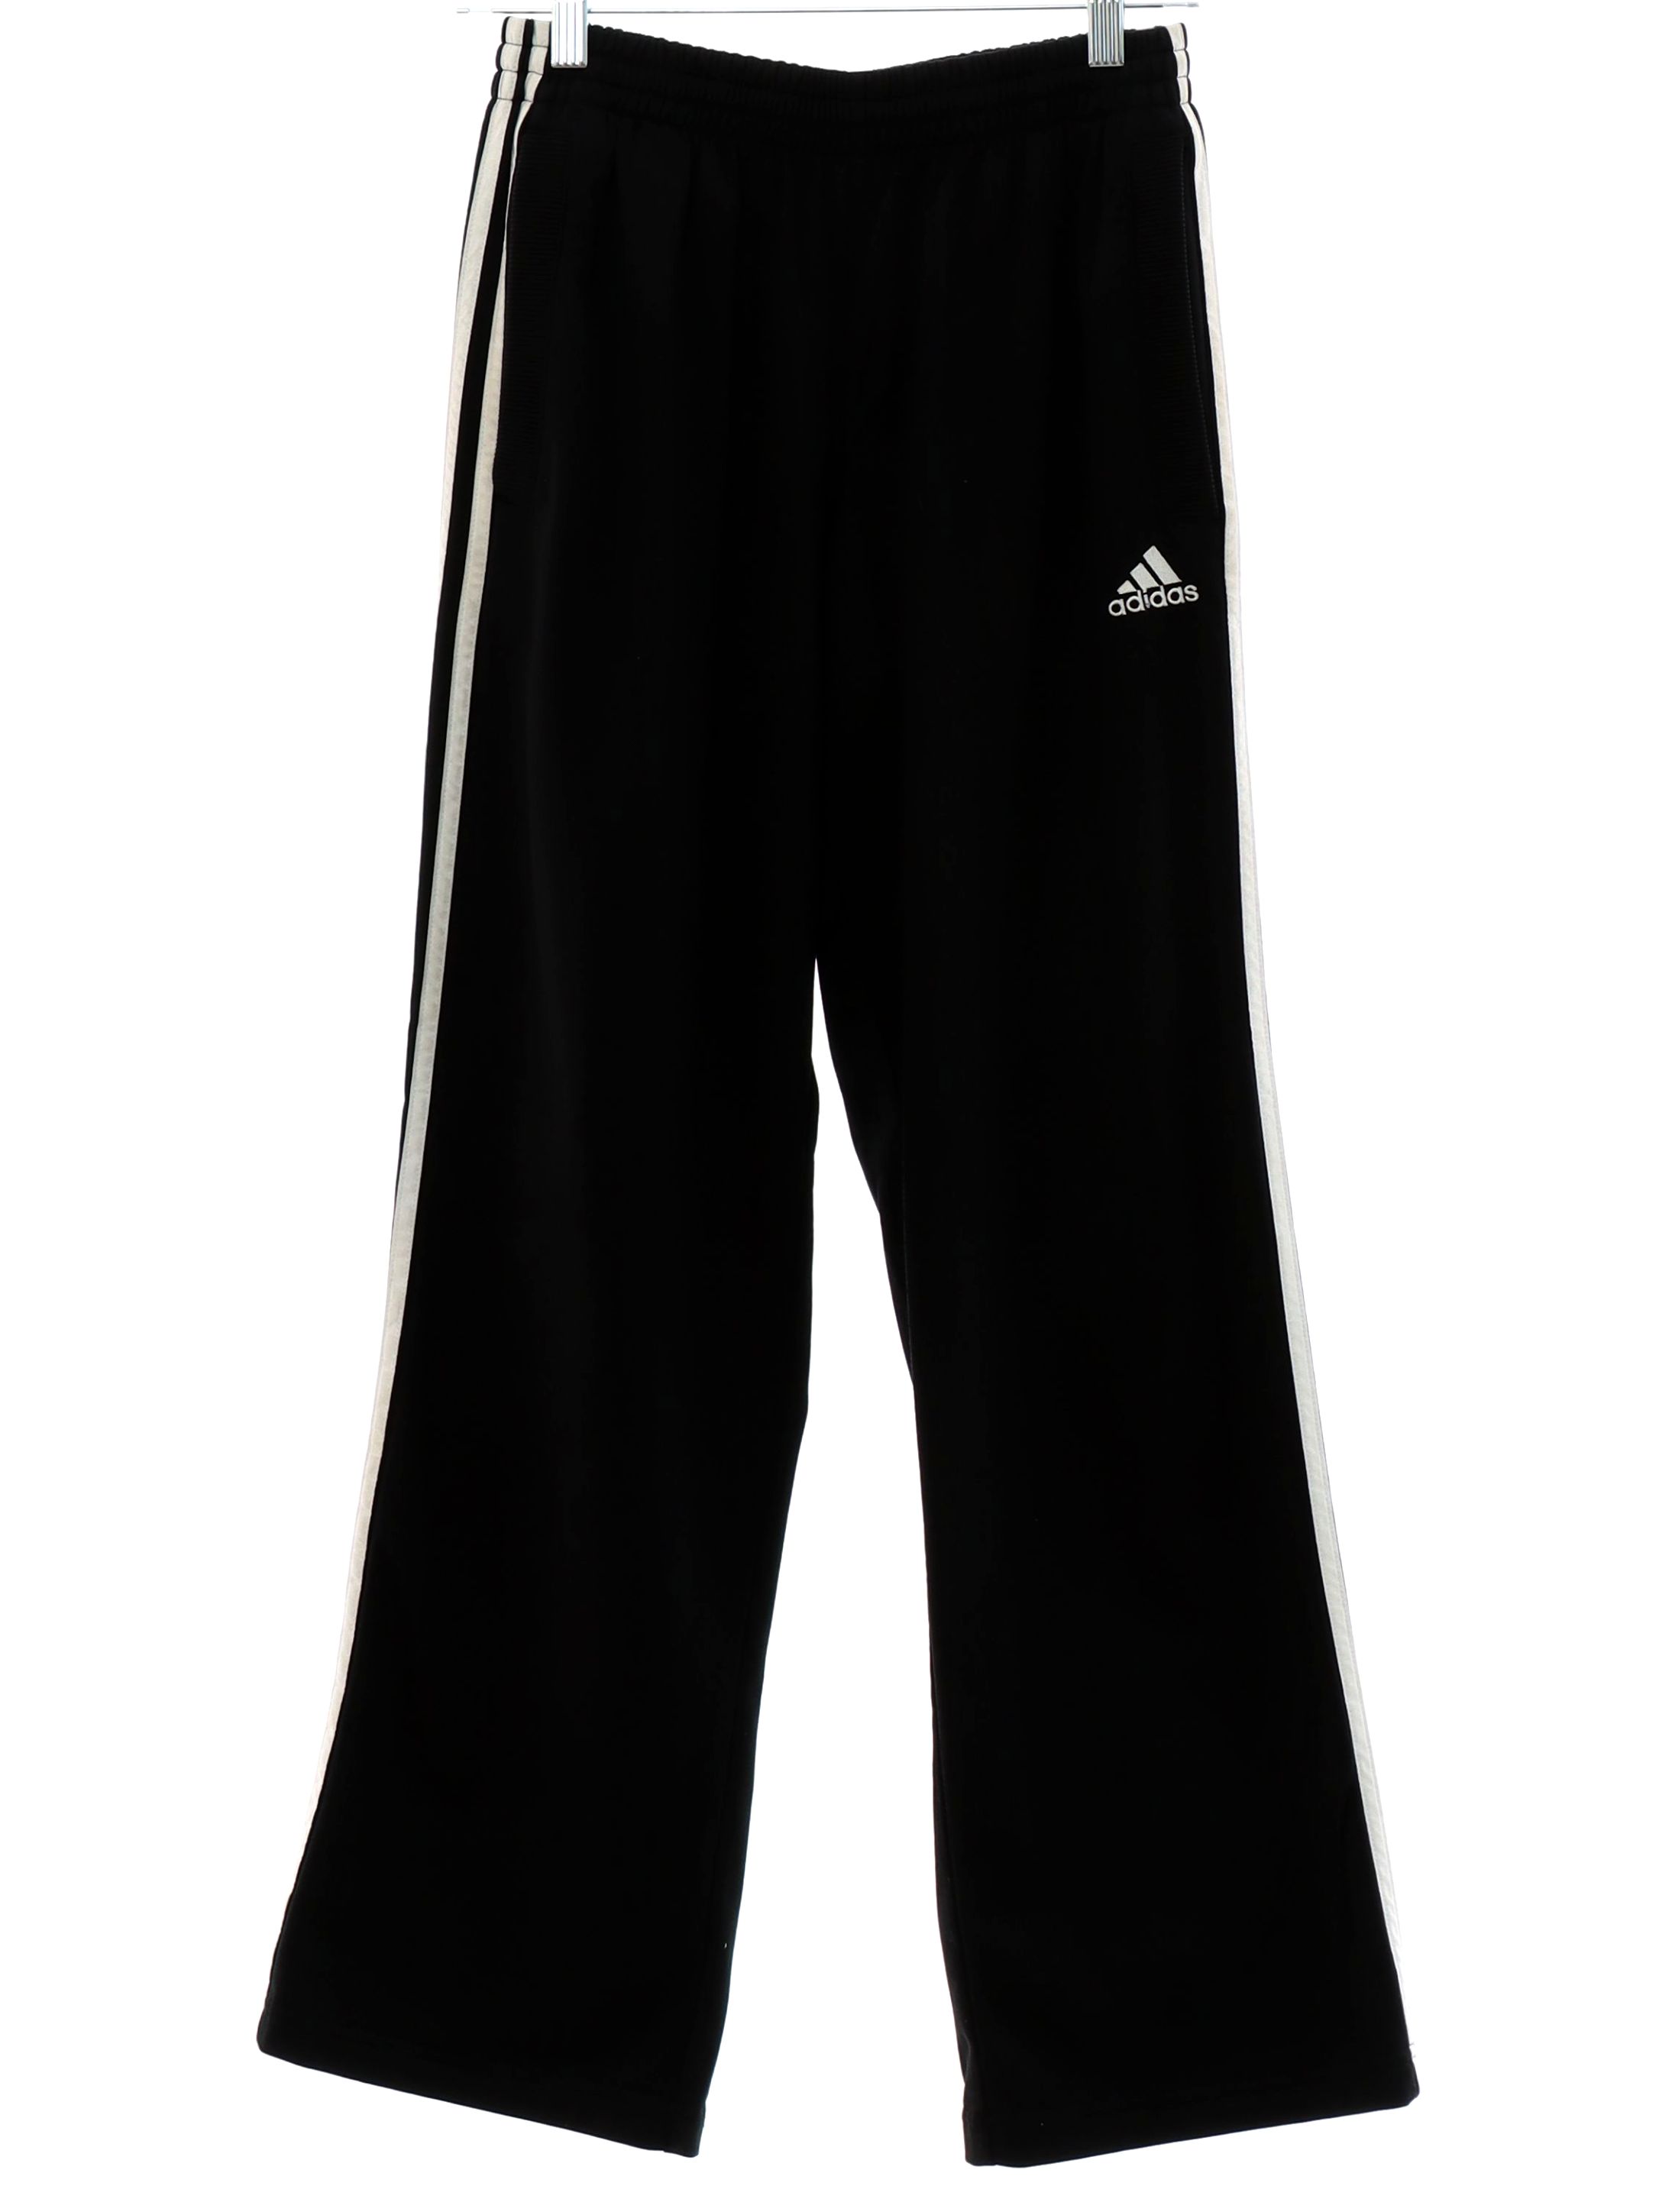 90s -Adidas- Mens black solid colored lightweight polyester flat front pants with cuffless hem, inset side entry front pockets with ribbed knit trim, no rear pockets, elastic waistline